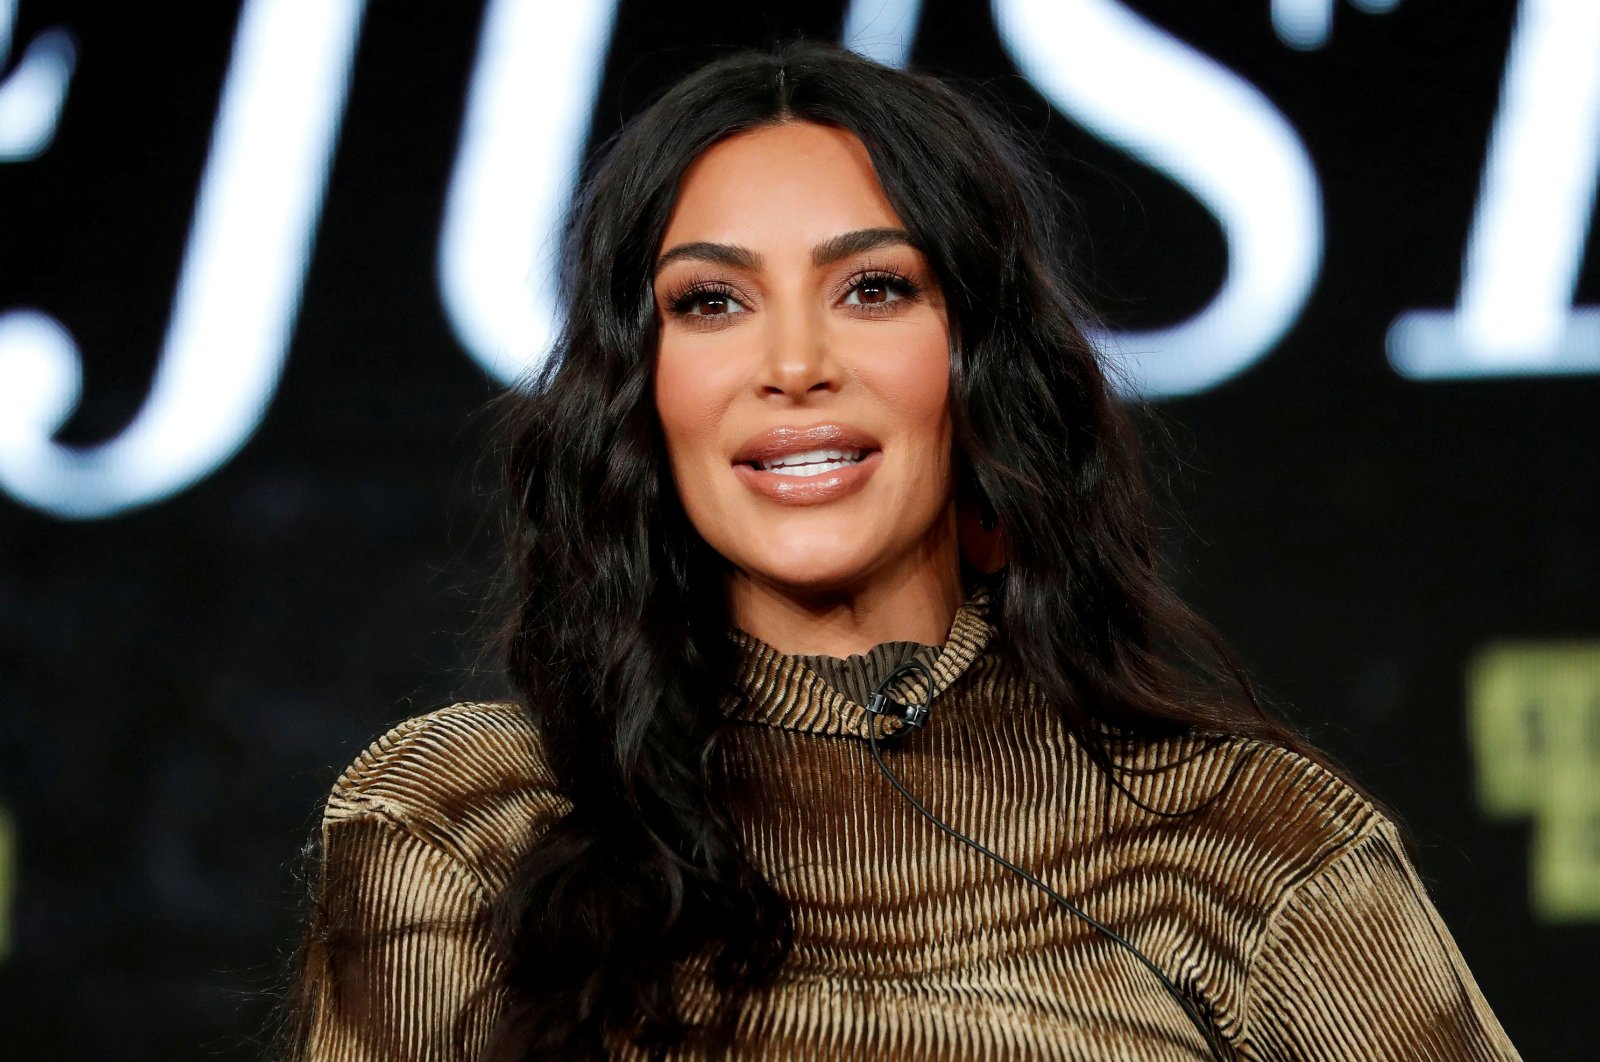 Television personality Kim Kardashian attends a panel for the documentary “Kim Kardashian West: The Justice Project” during the Winter Television Critics Association Press Tour in Pasadena, California, U.S., Jan. 18, 2020. (Reuters Photo)